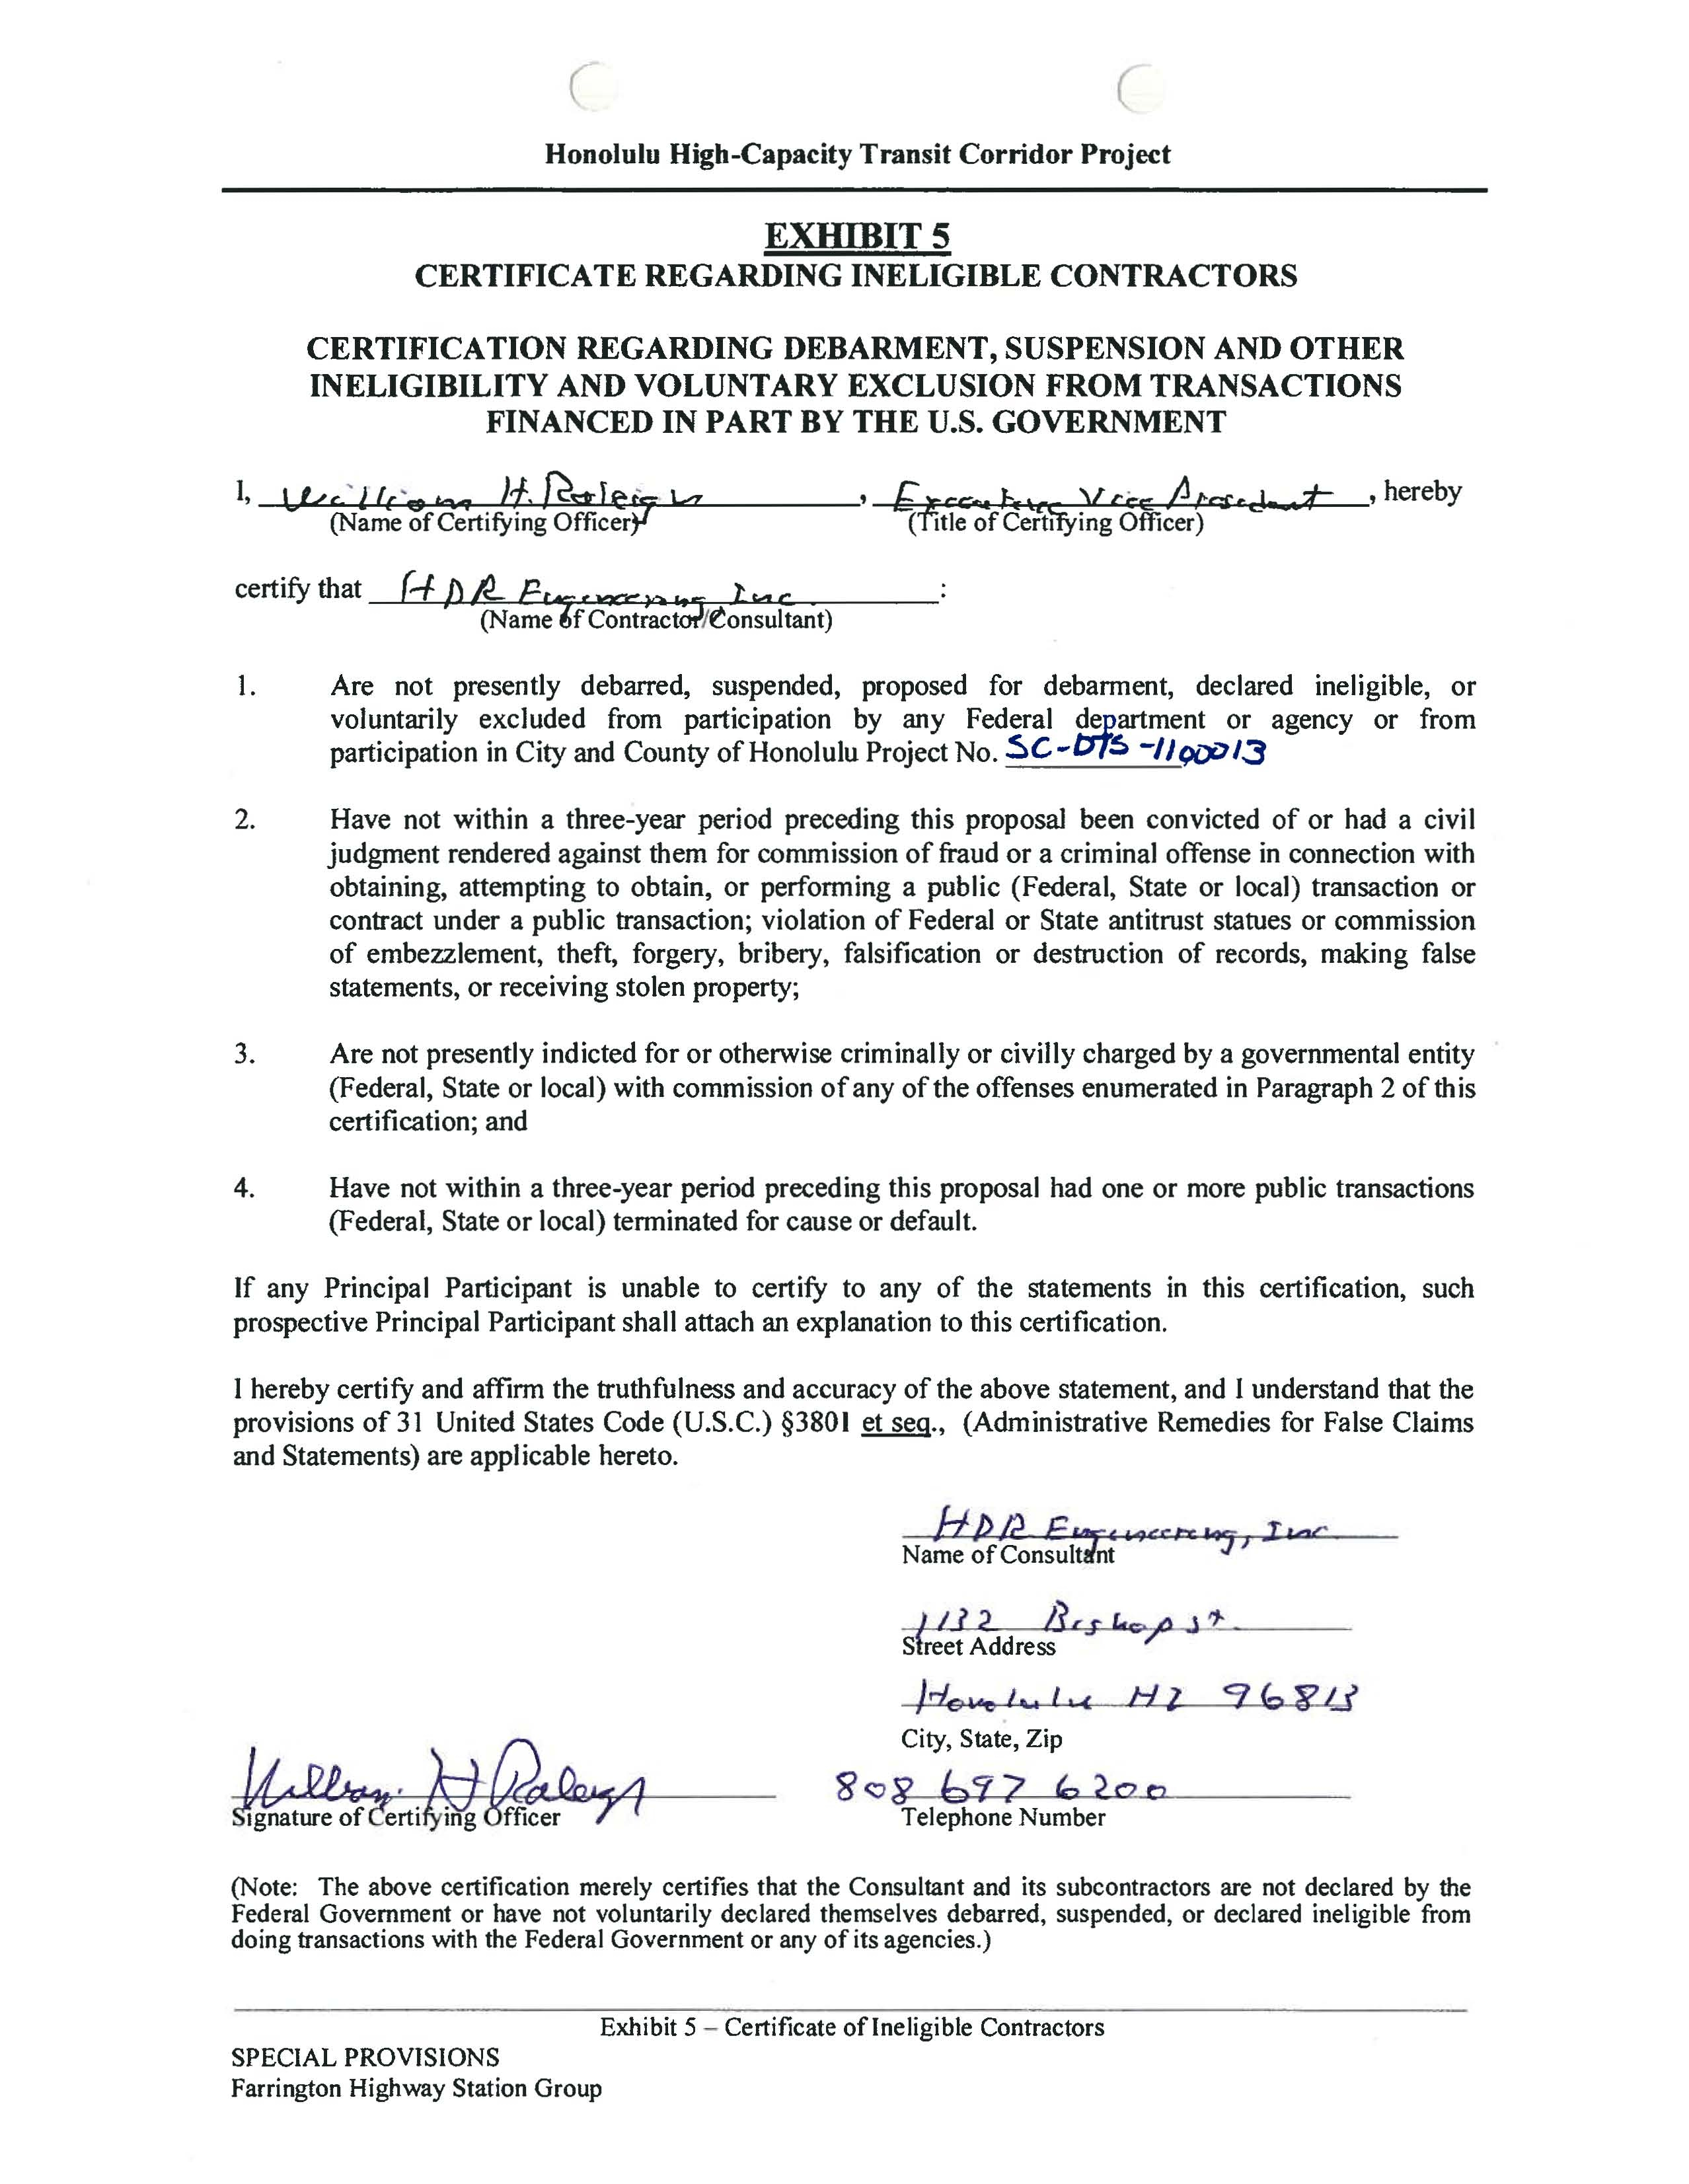 letter of intent contract sample